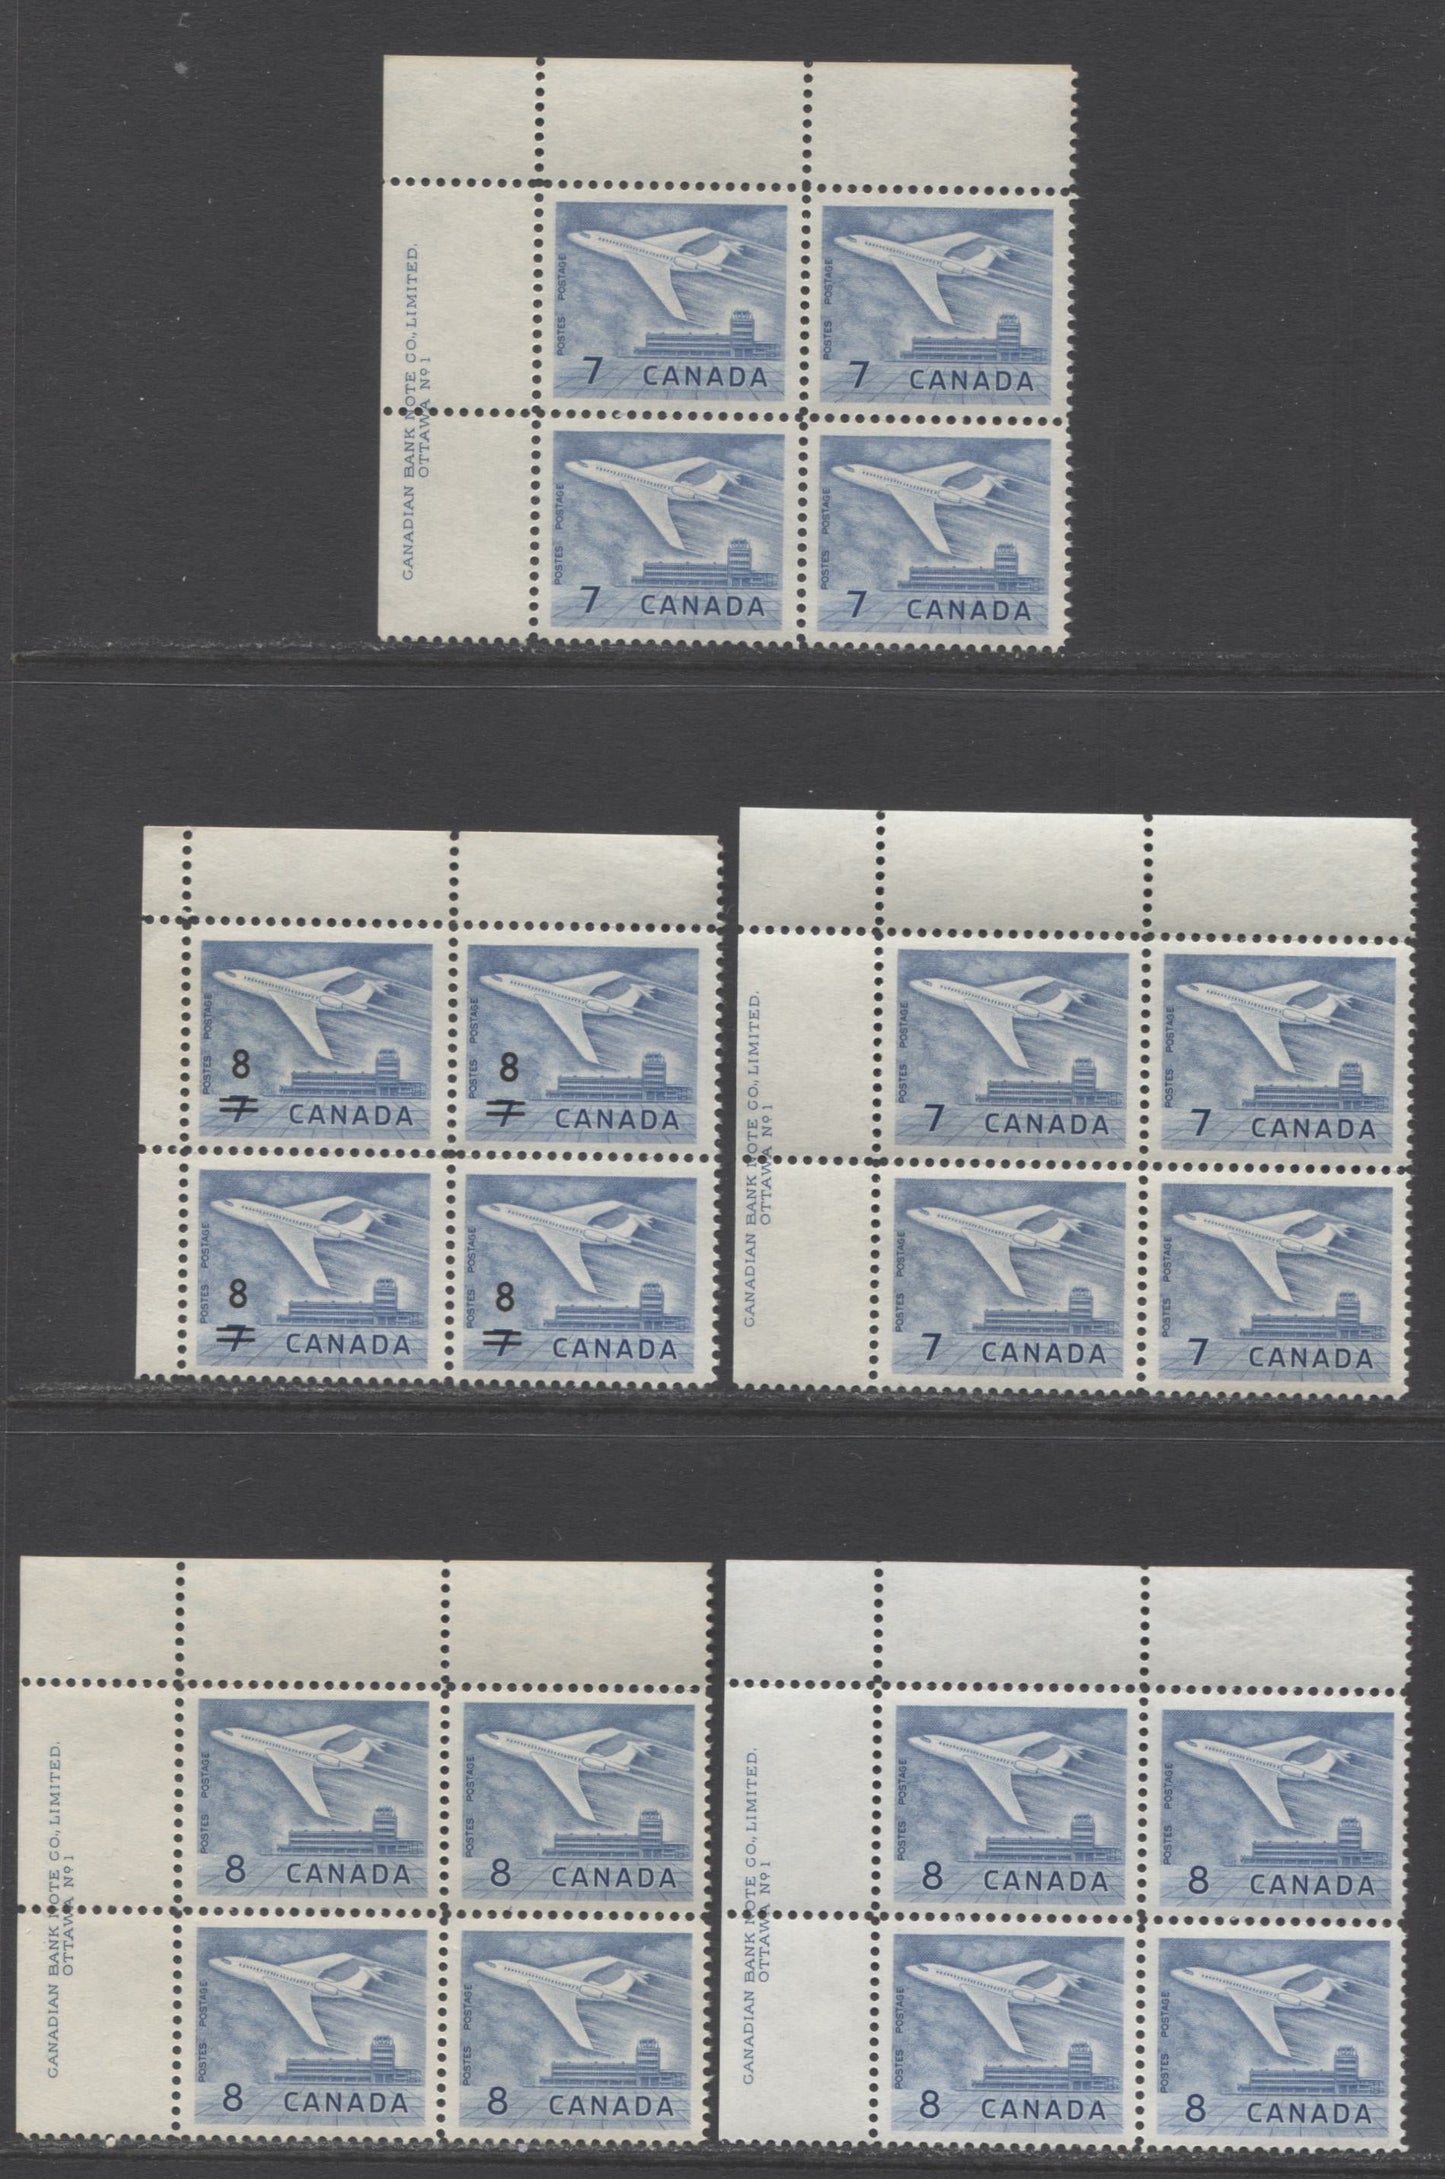 Lot 146 Canada #414, 430, 436,i 7c, 8c on 7c & 8c Blue Jet Plane, 1964 Jet Definitives & Overprint Issues, 5 VFNH UL Plate 1 & Field Stock Blocks Of 4 With Paper, Shade & Gum Varieties